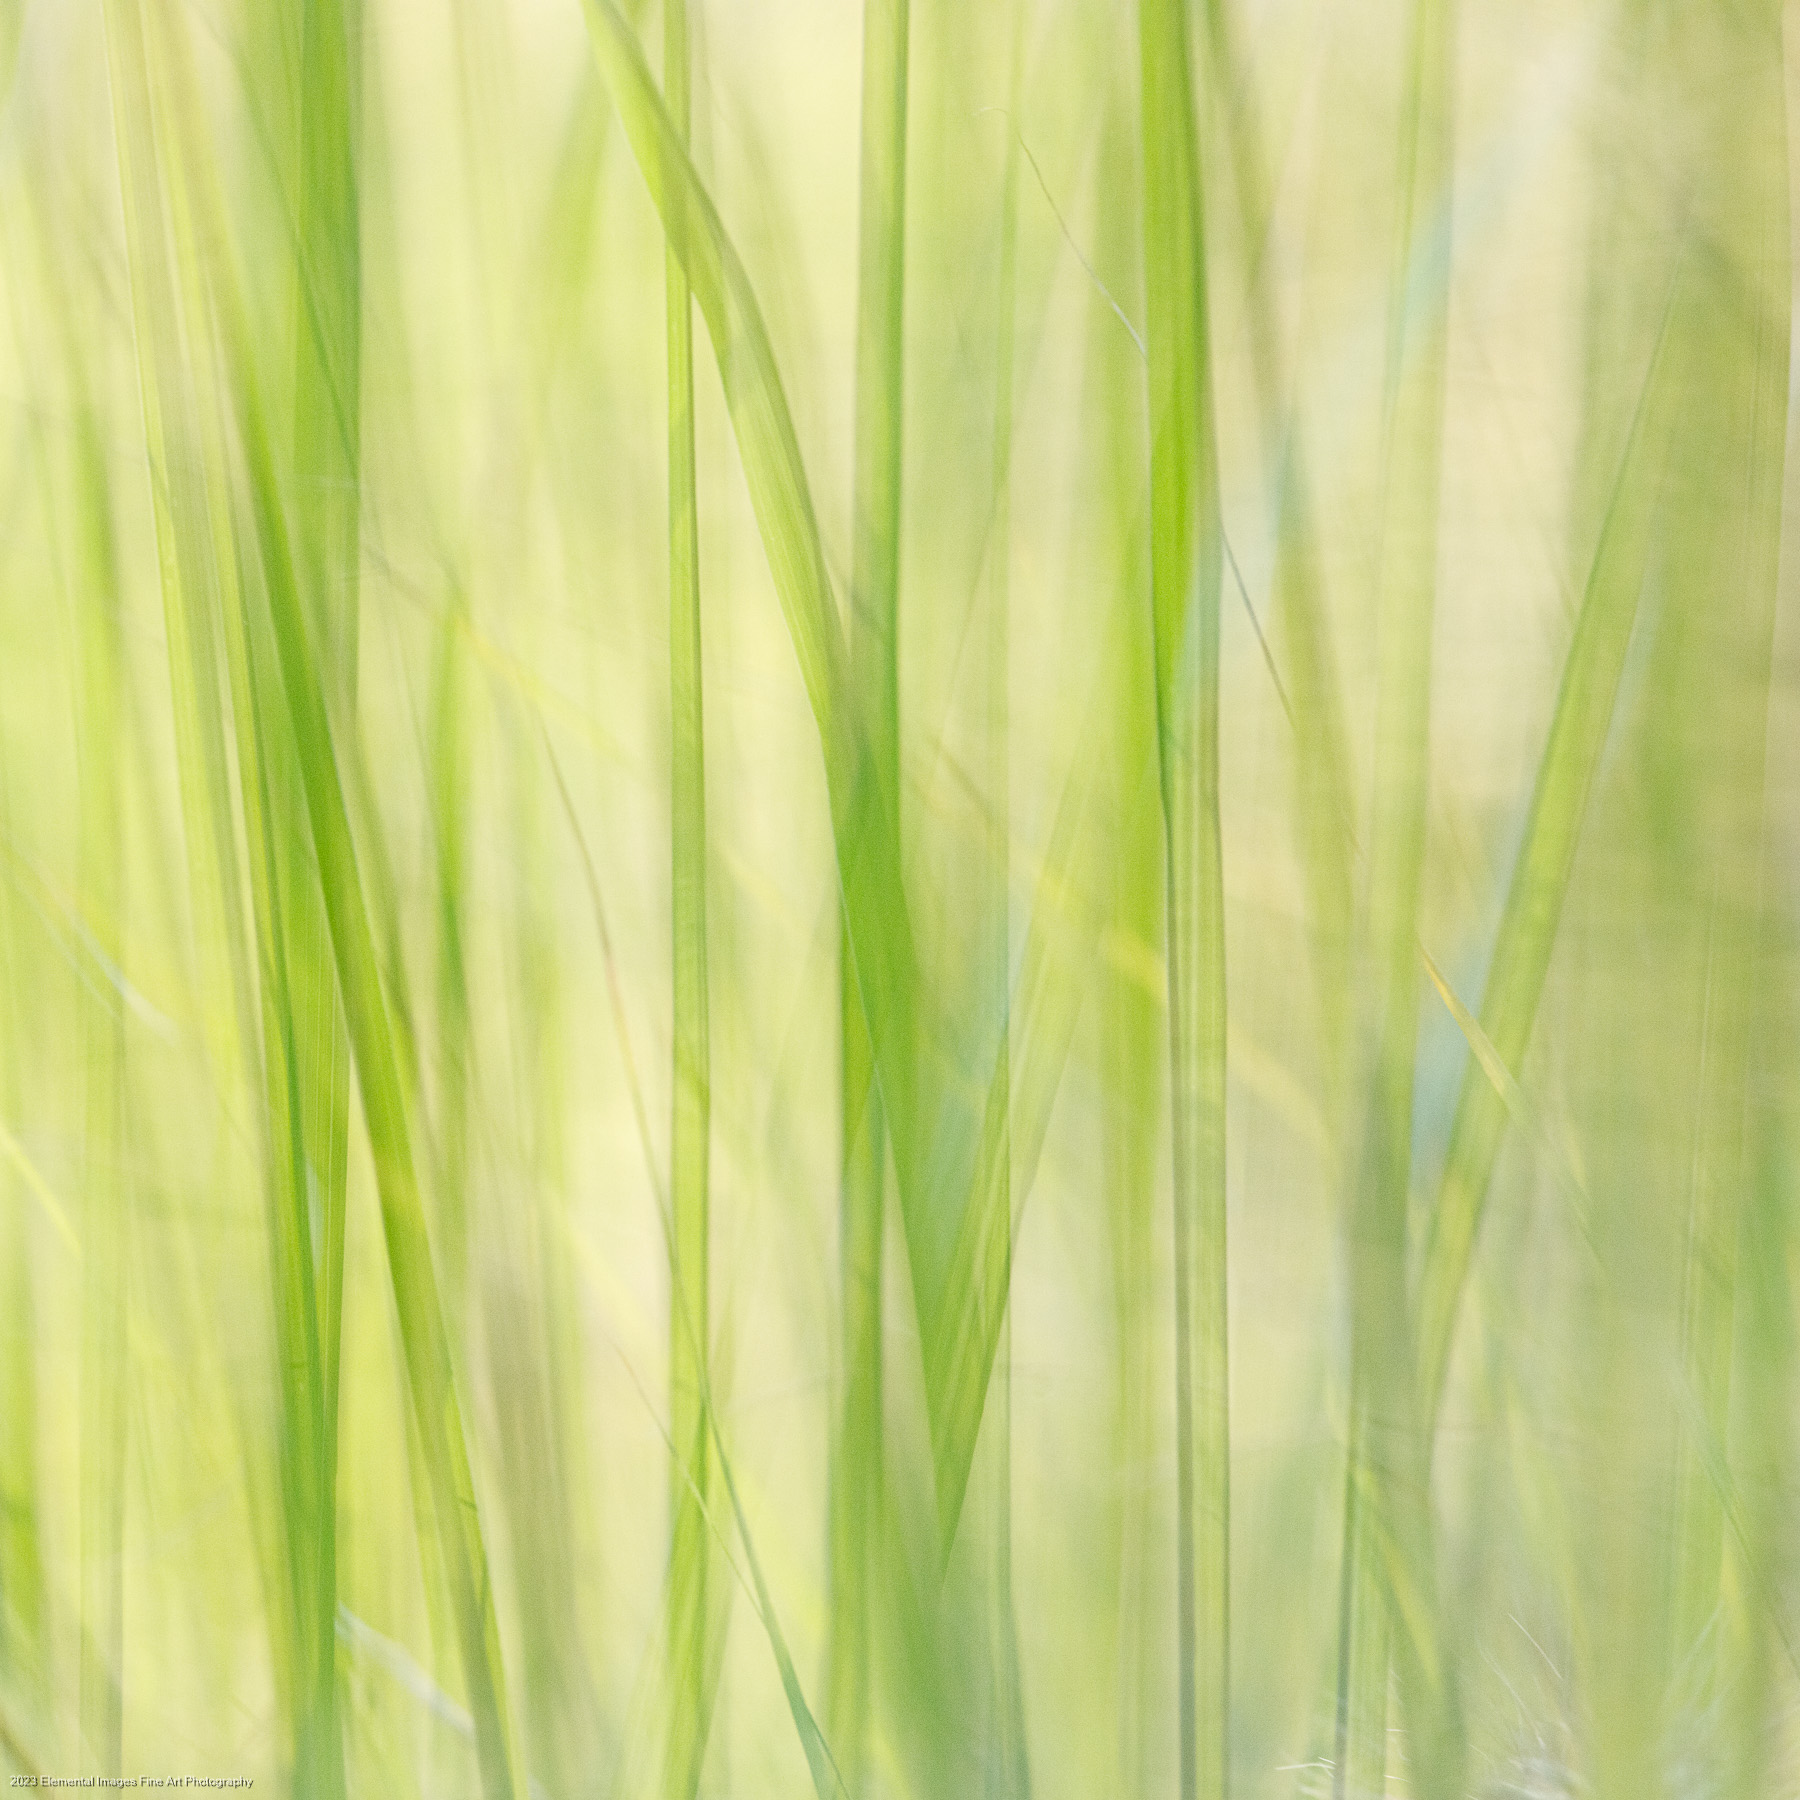 Grasses #192 | Portland | OR | USA - © 2023 Elemental Images Fine Art Photography - All Rights Reserved Worldwide